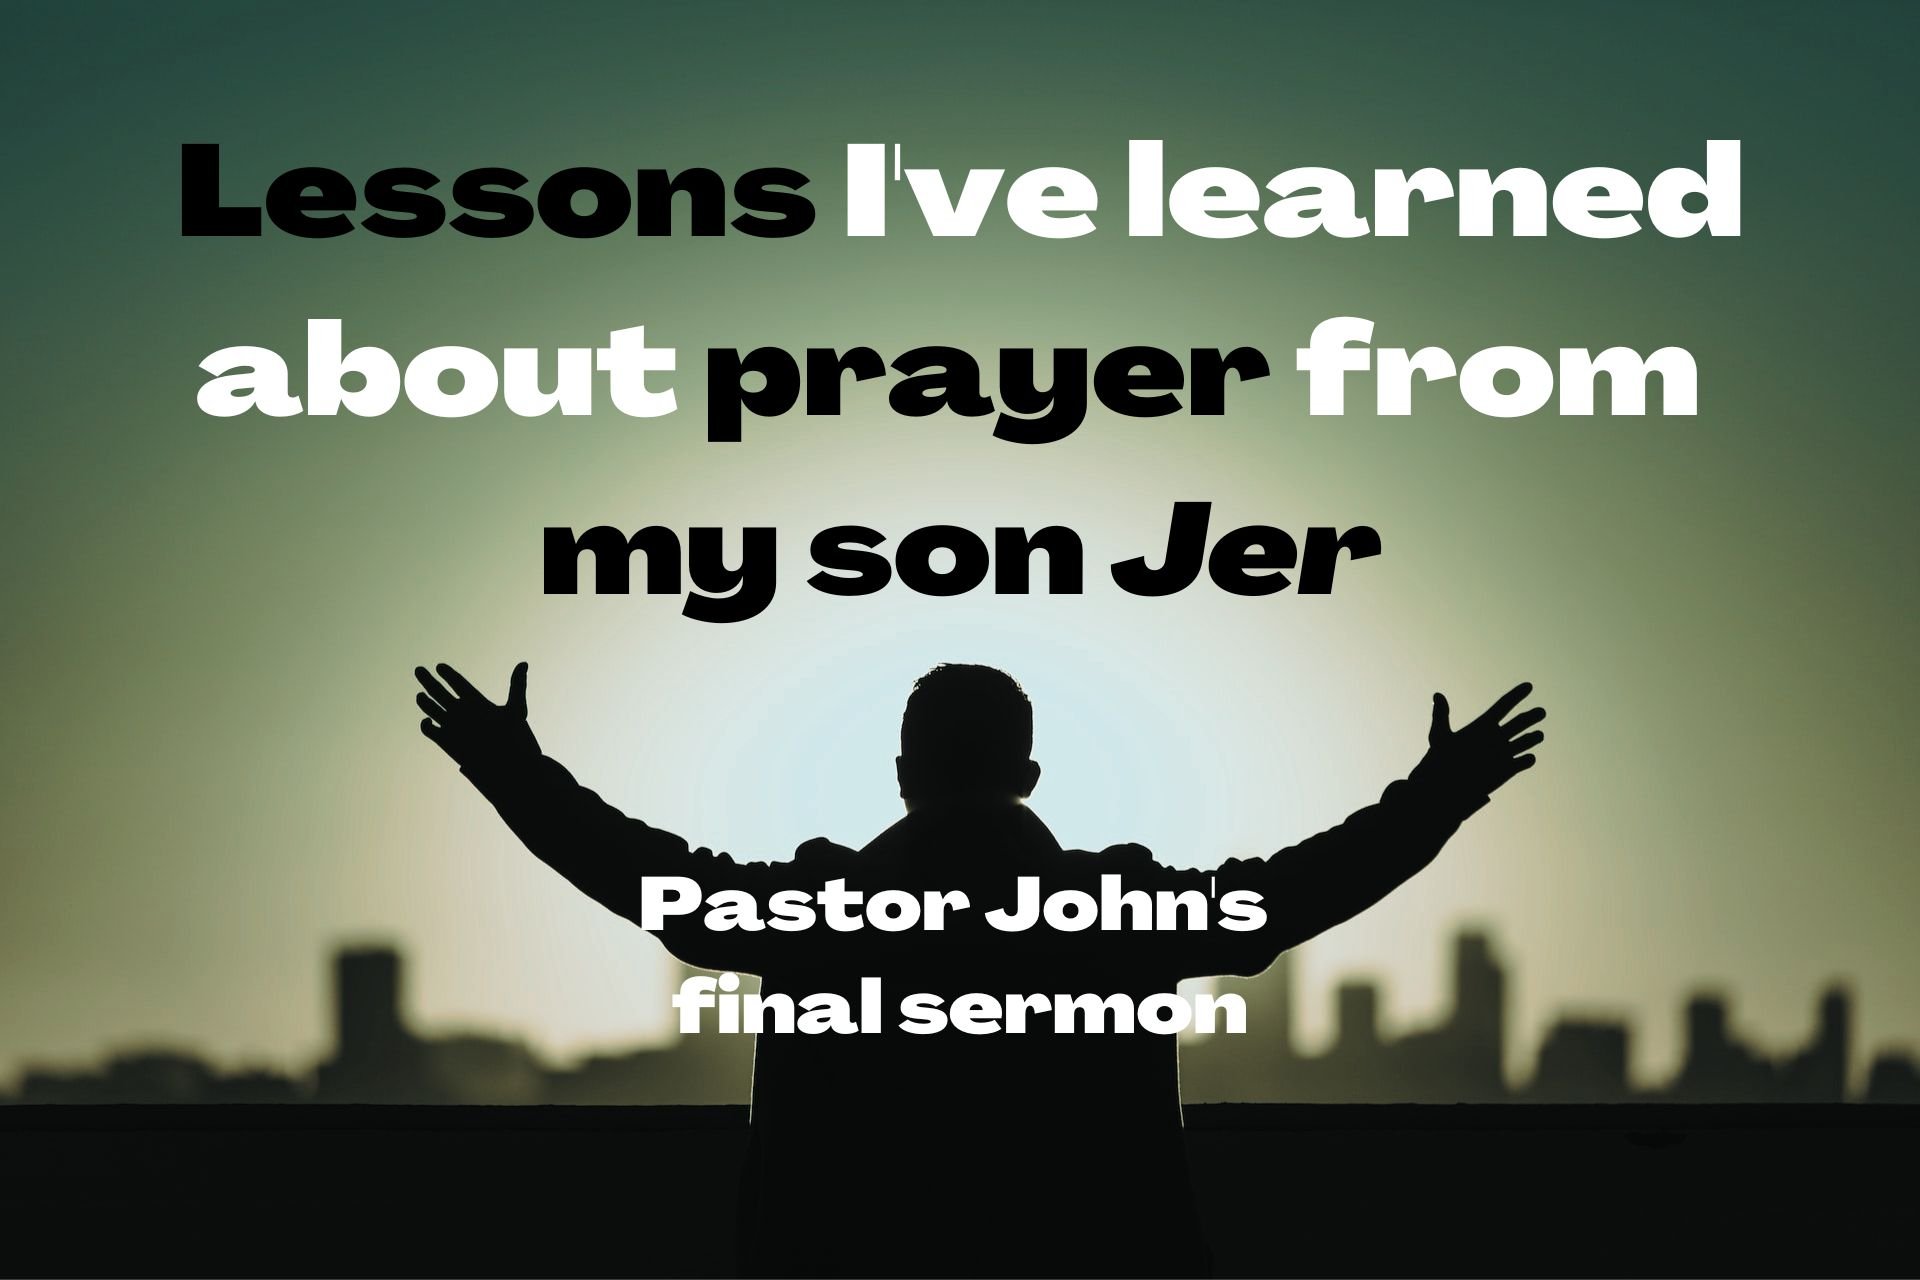 Lessons I've learned about prayer from my son Jer (1).jpg